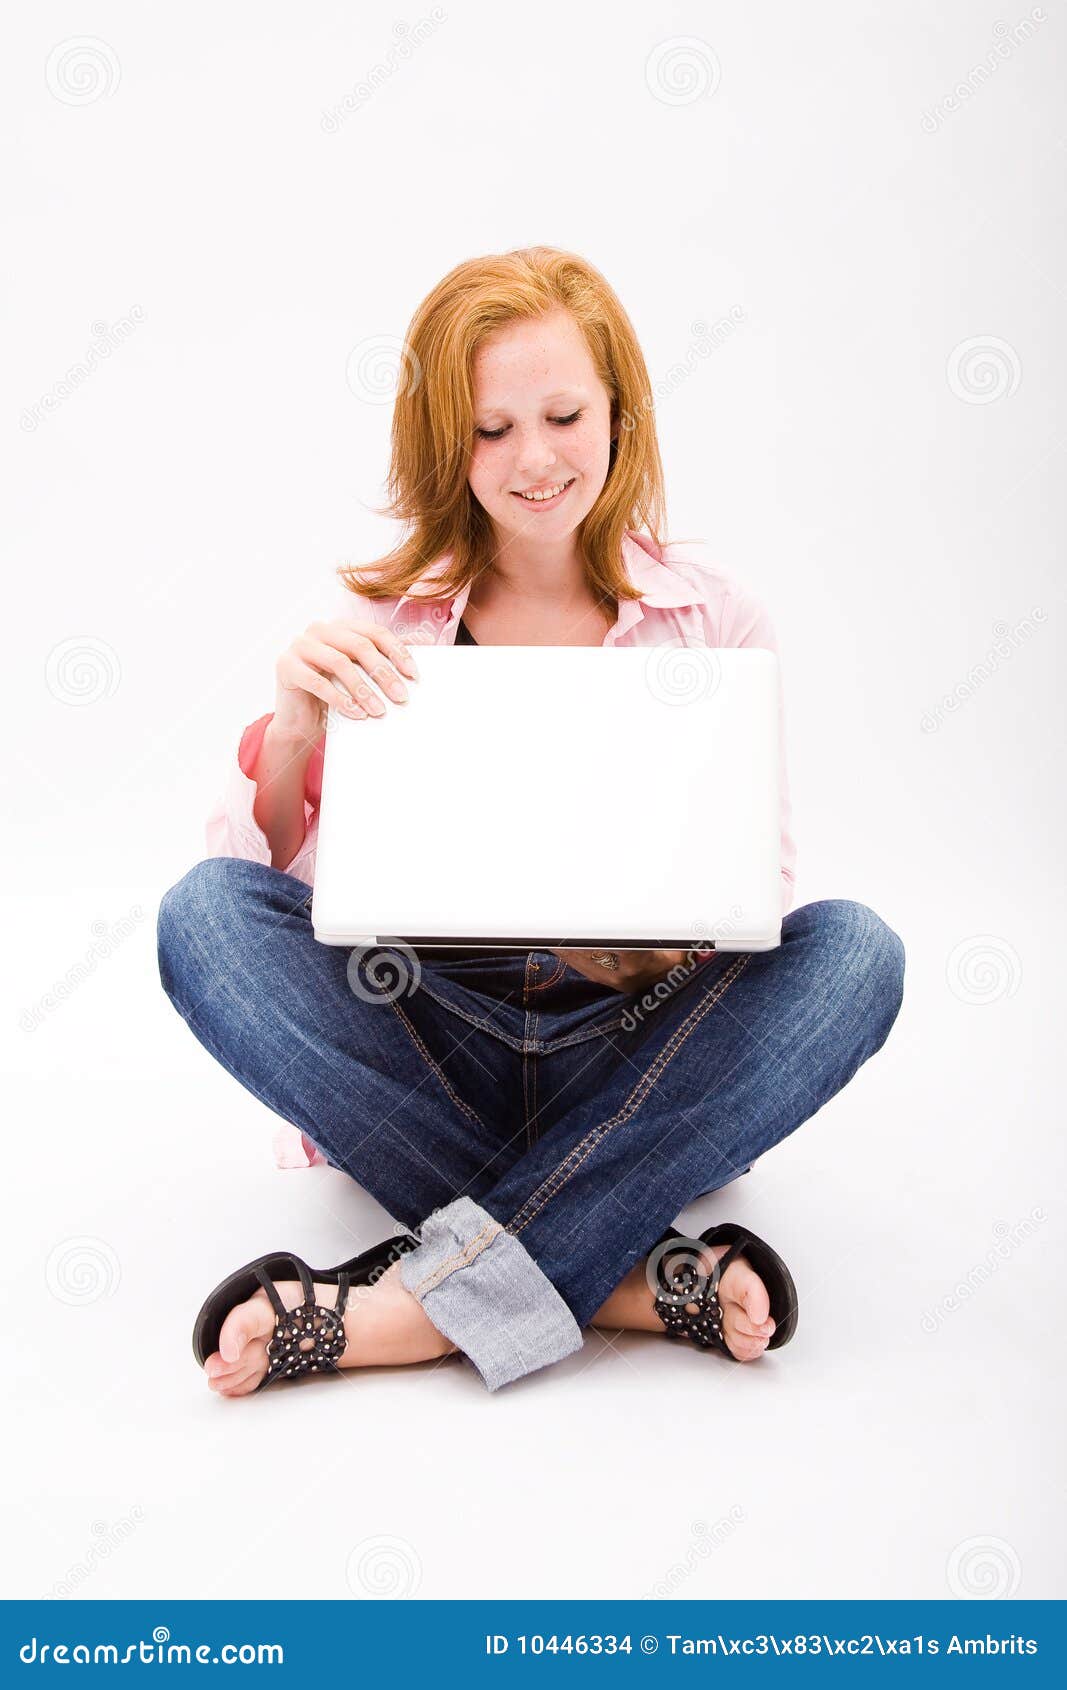 Beautiful Freckled Teen with Computer Stoc image picture